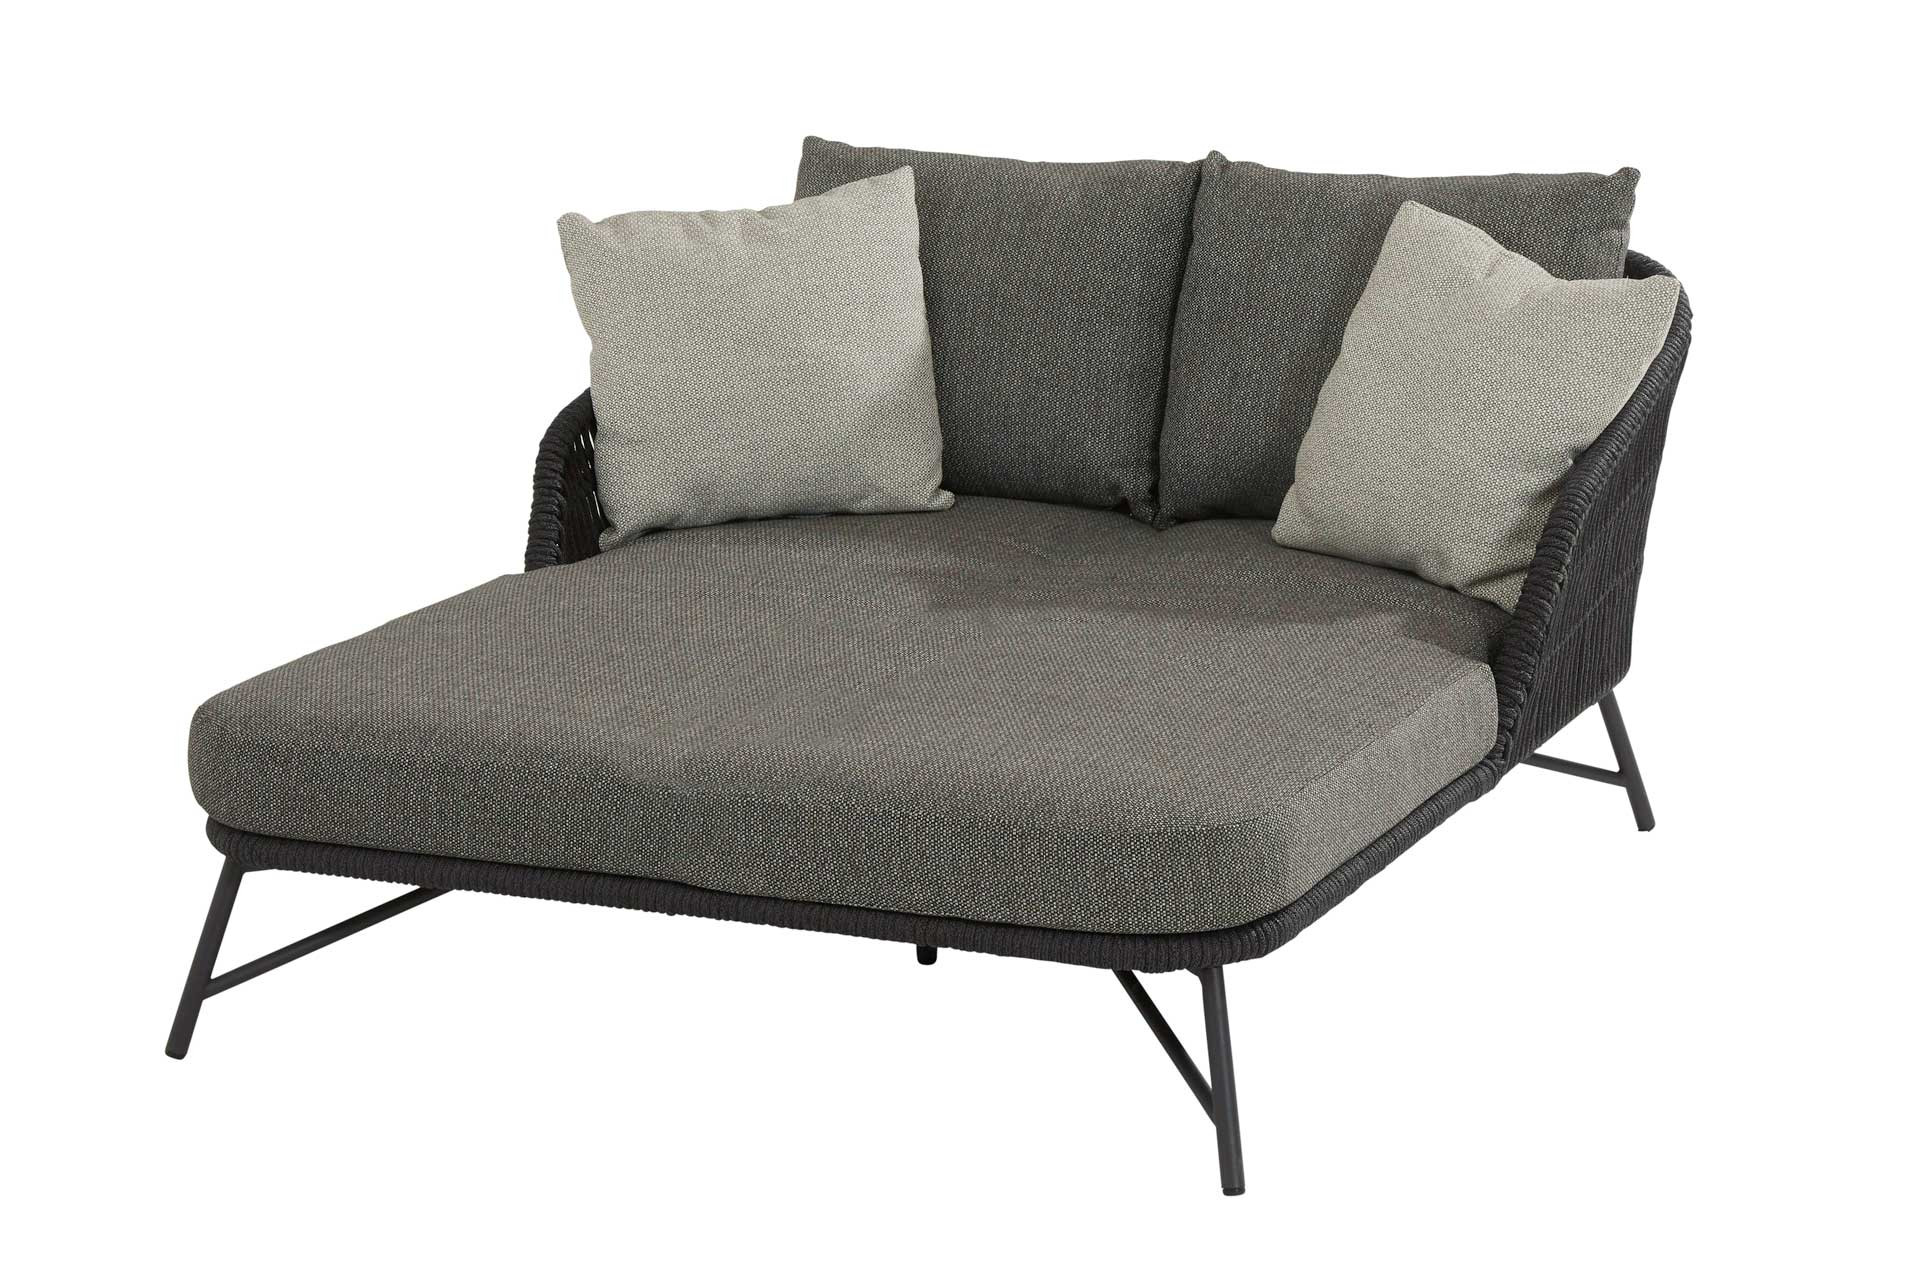 Marbella daybed with 5 cushions